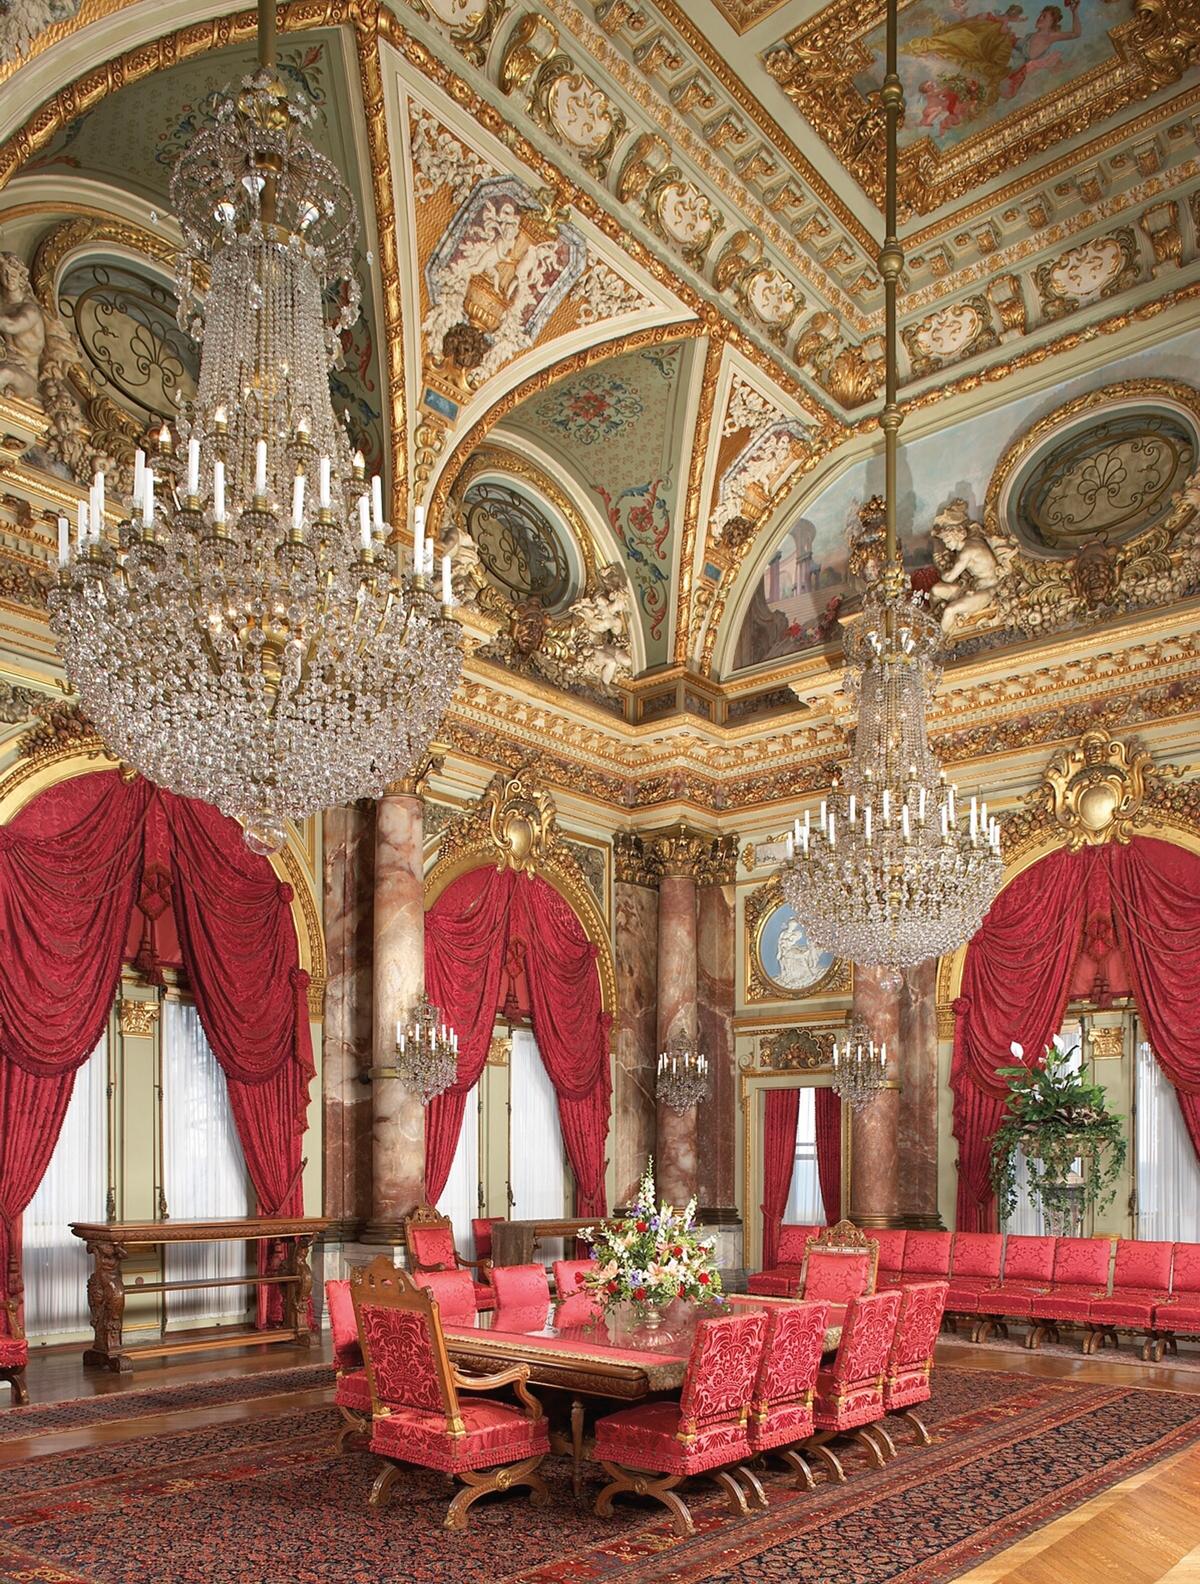 The Dining Room is the most lavish room inside The Breakers, featuring 12 rose alabaster Corinthian columns, a ceiling mural of the goddess Aurora bringing in the dawn on a four-horse chariot, and two Baccarat crystal chandeliers. (Courtesy of The Preservation Society of Newport County)